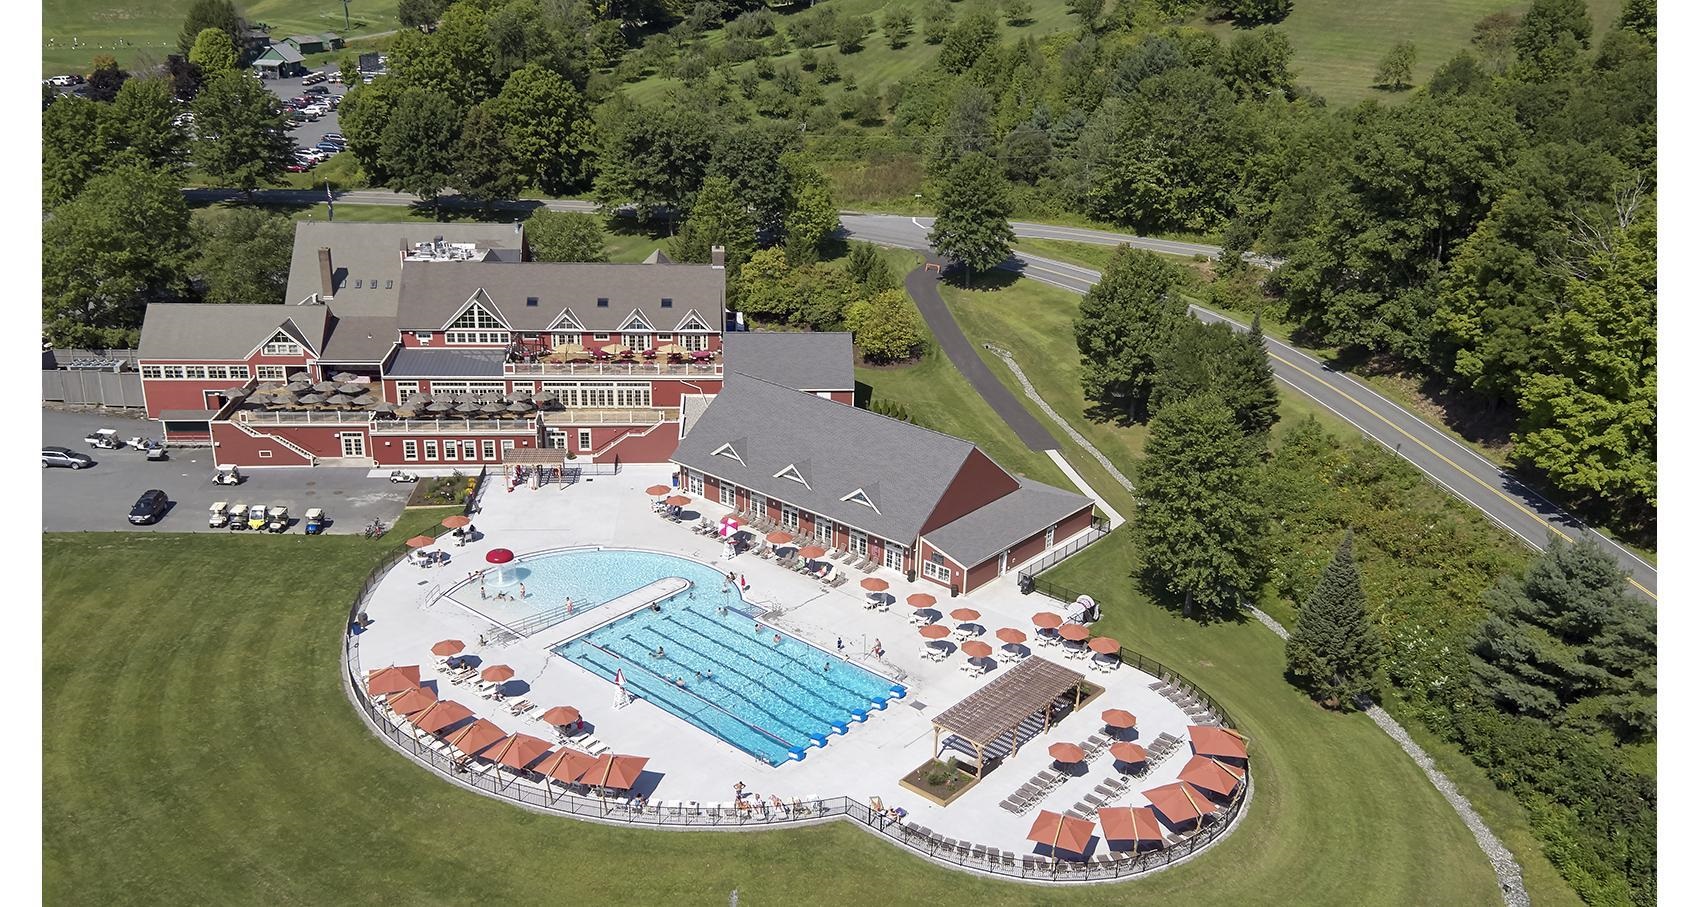 Quechee Club Pool and Recreation Area